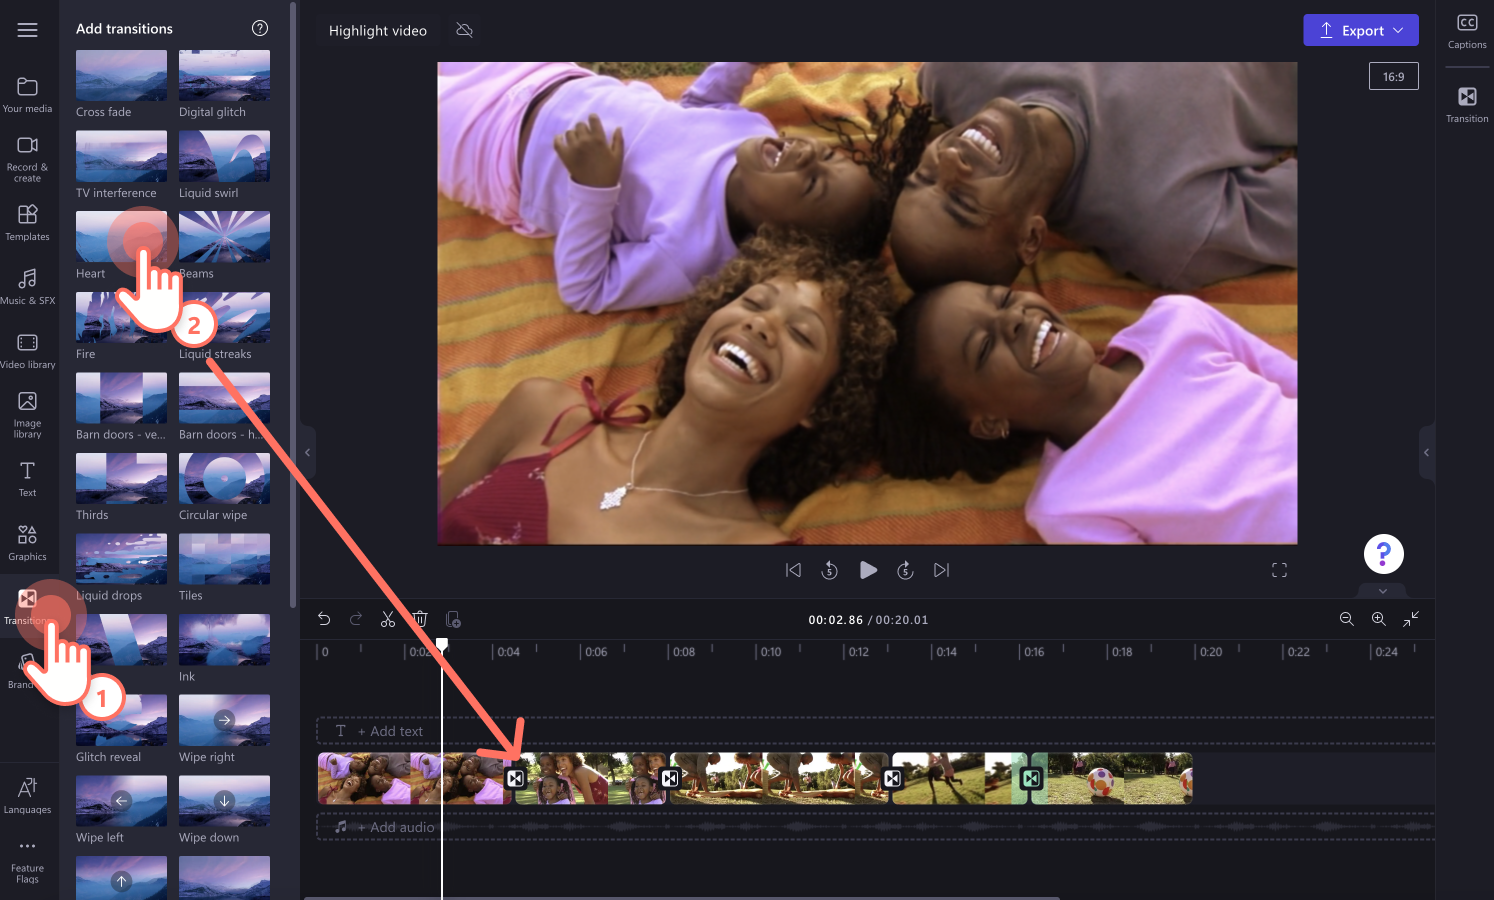 An image of a user adding a transition between two clips.